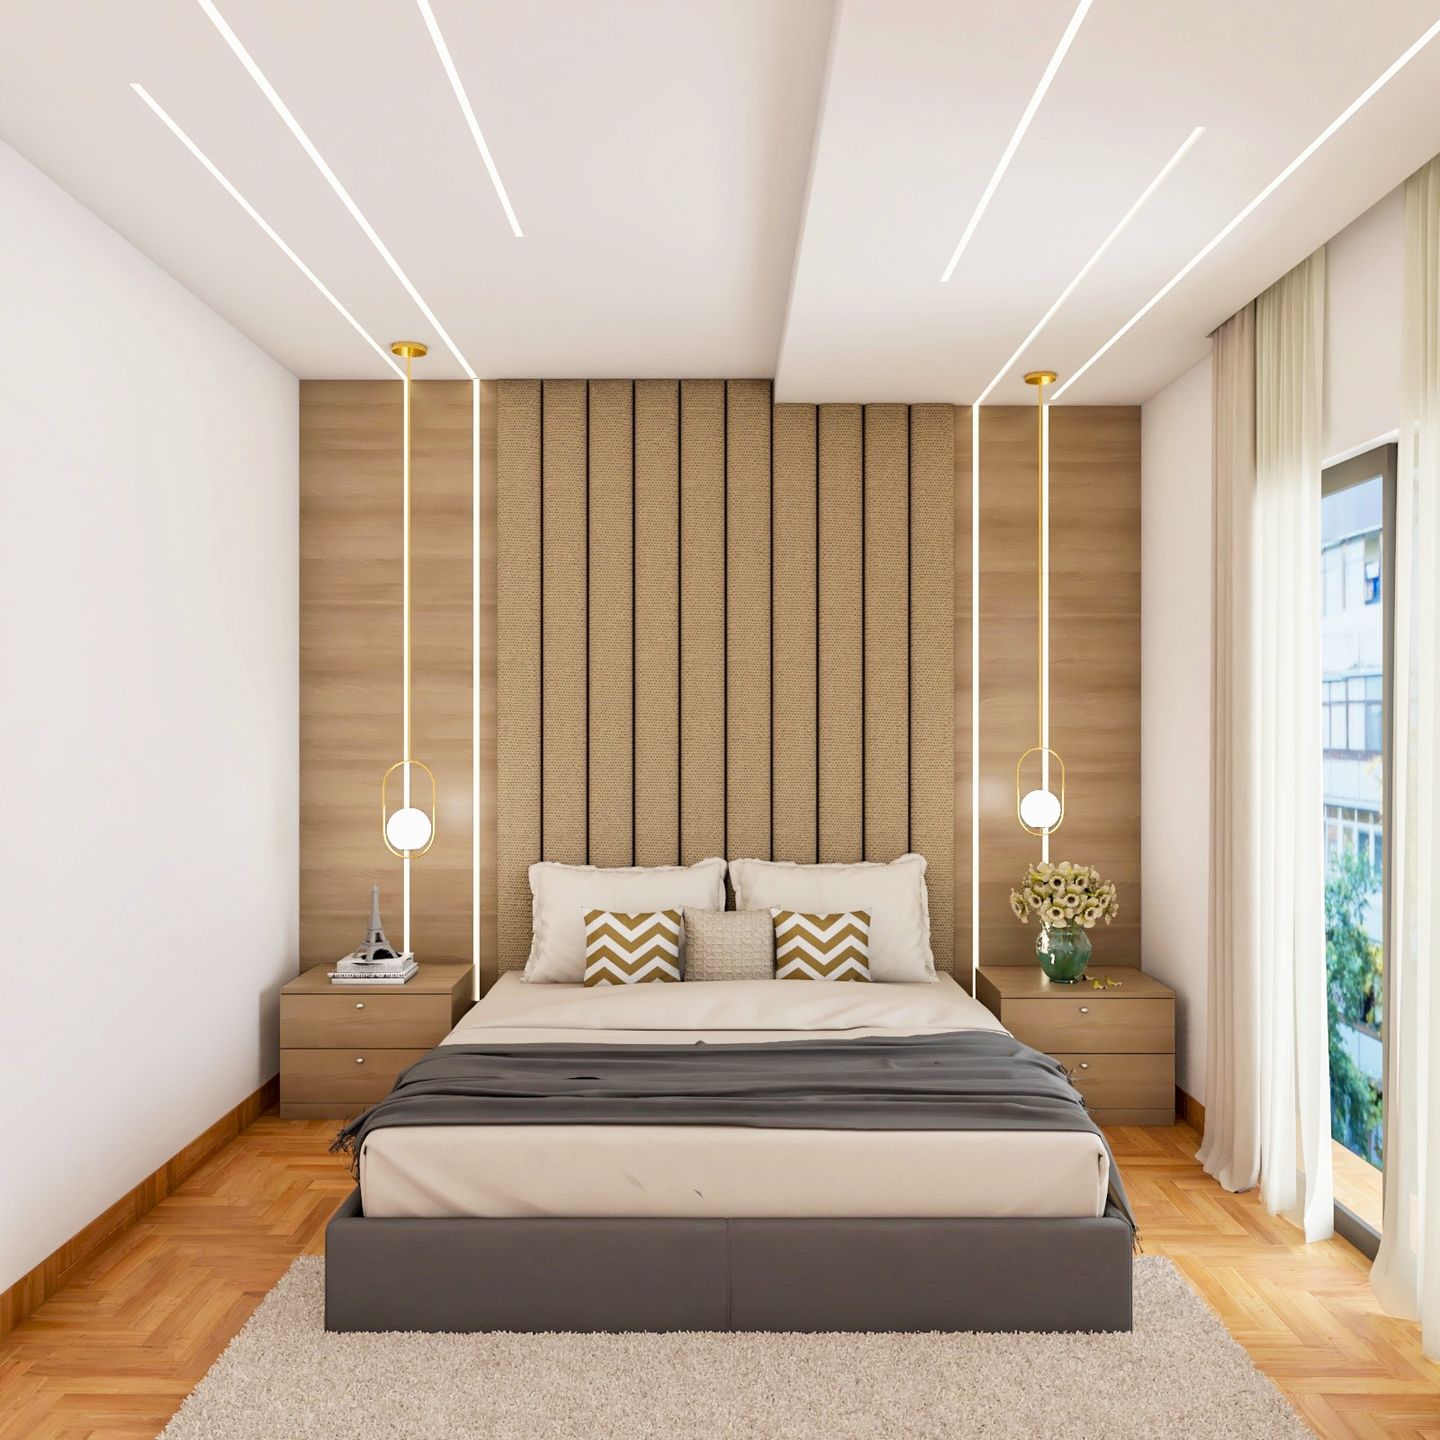 Bedroom False Ceiling Design With White Stripes And Wooden Accent Wall - Livspace